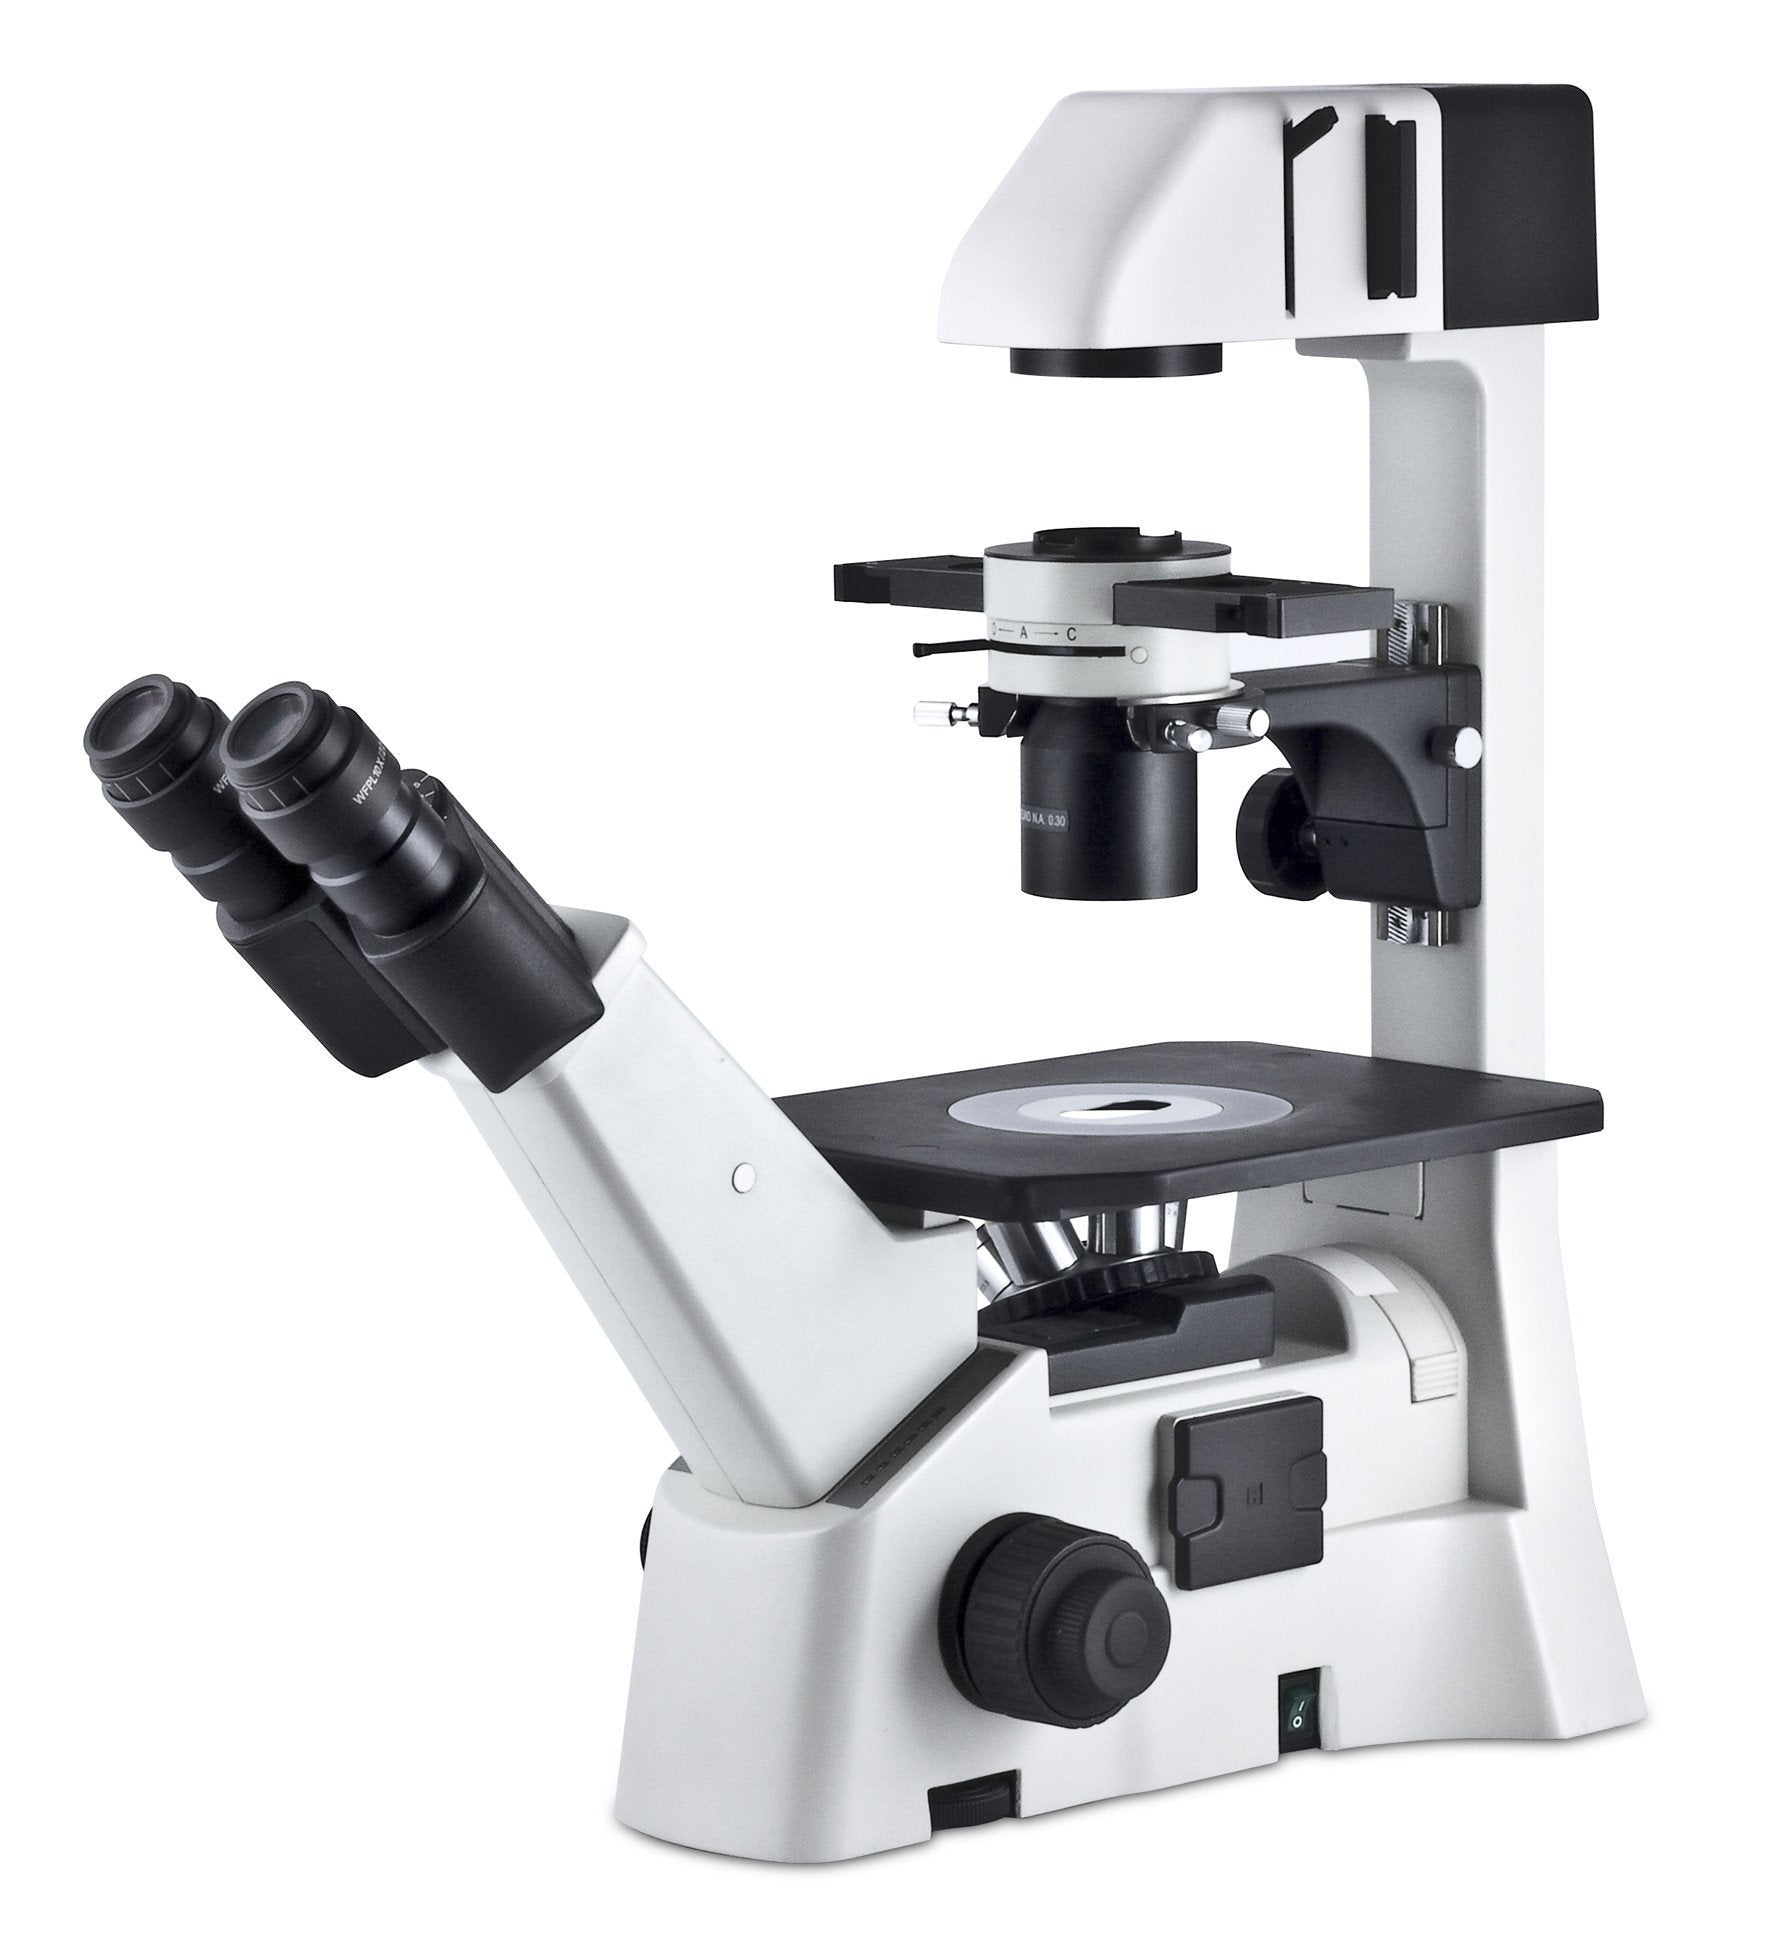 Motic AE31 Phase Contrast Inverted Microscope Series